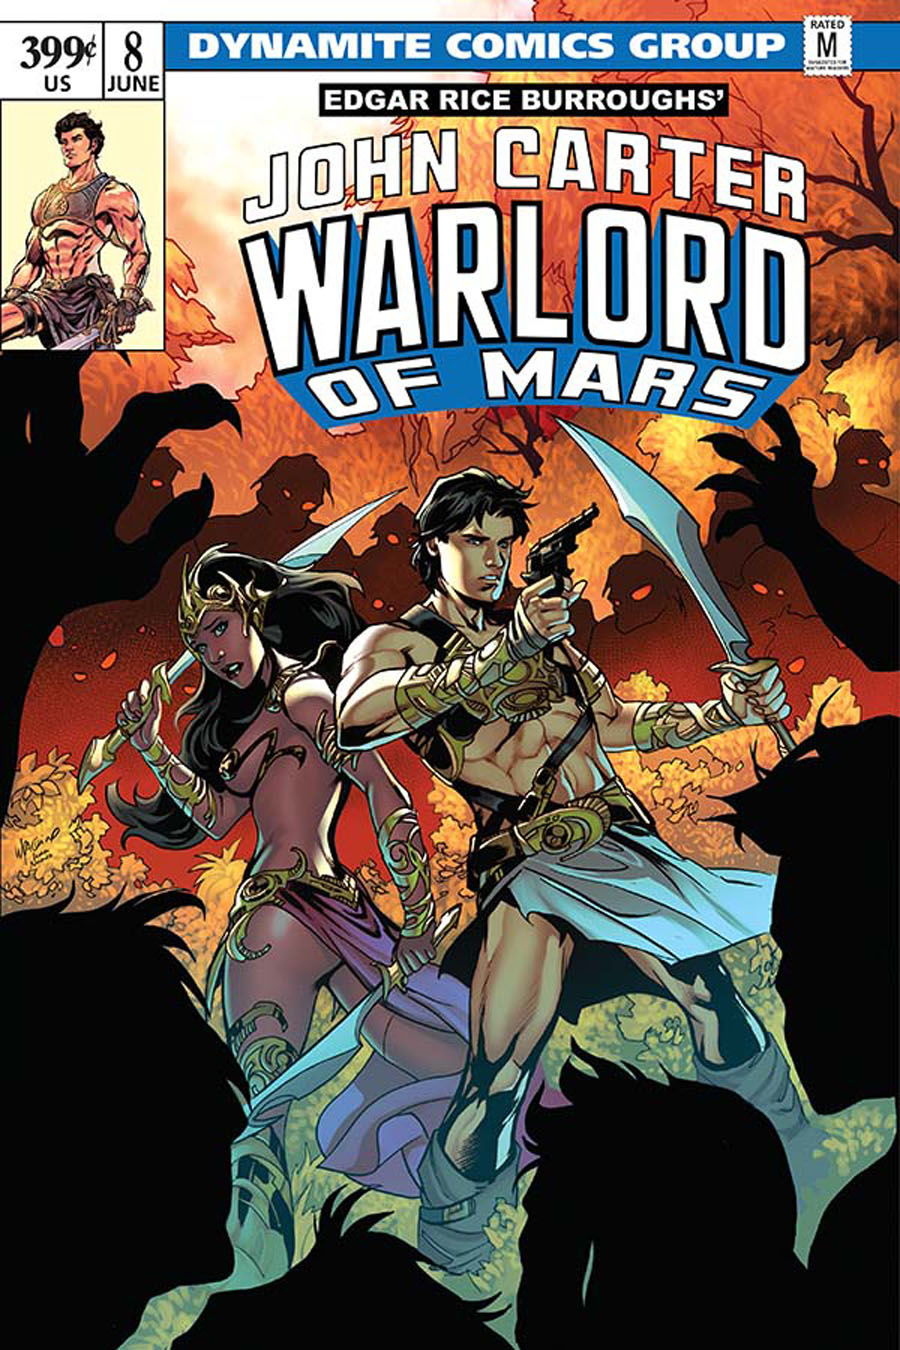 John Carter Warlord Of Mars Vol 2 #8 Cover C Variant Emanuela Lupacchino Cover